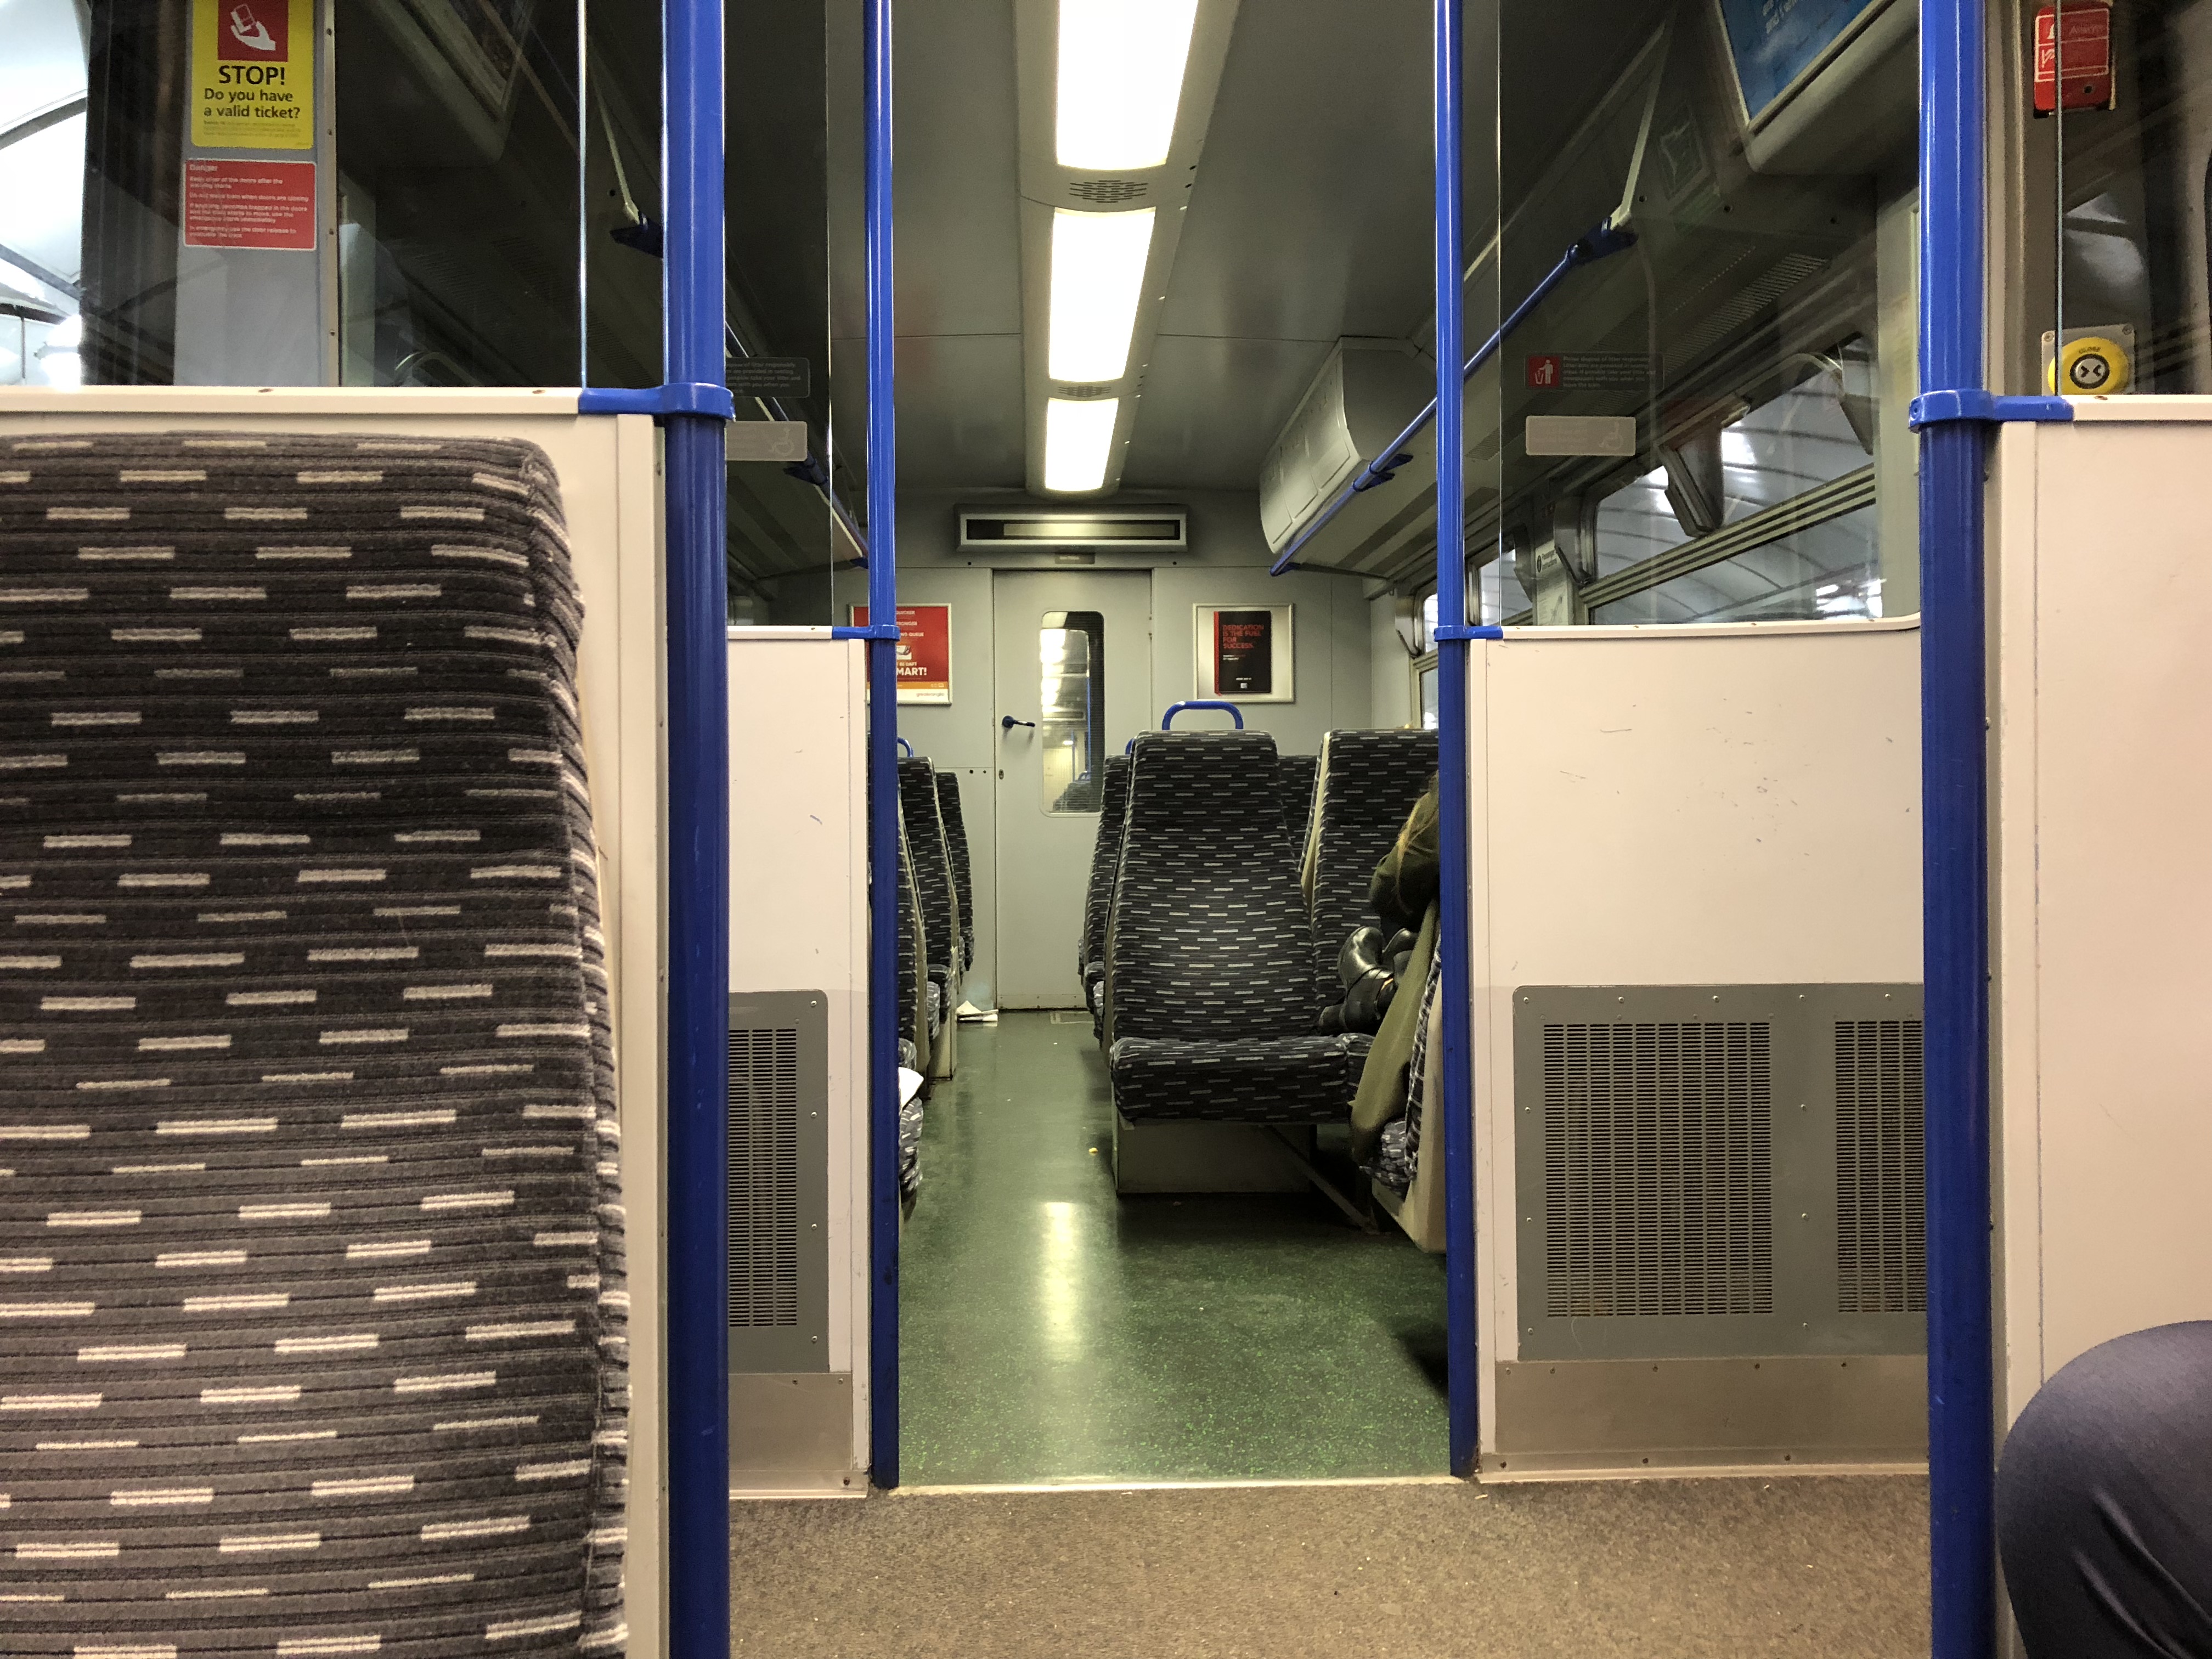  The fluorescent lighting of this train carriage isn’t ideal to shoot with, but the iPhone 8 does okay